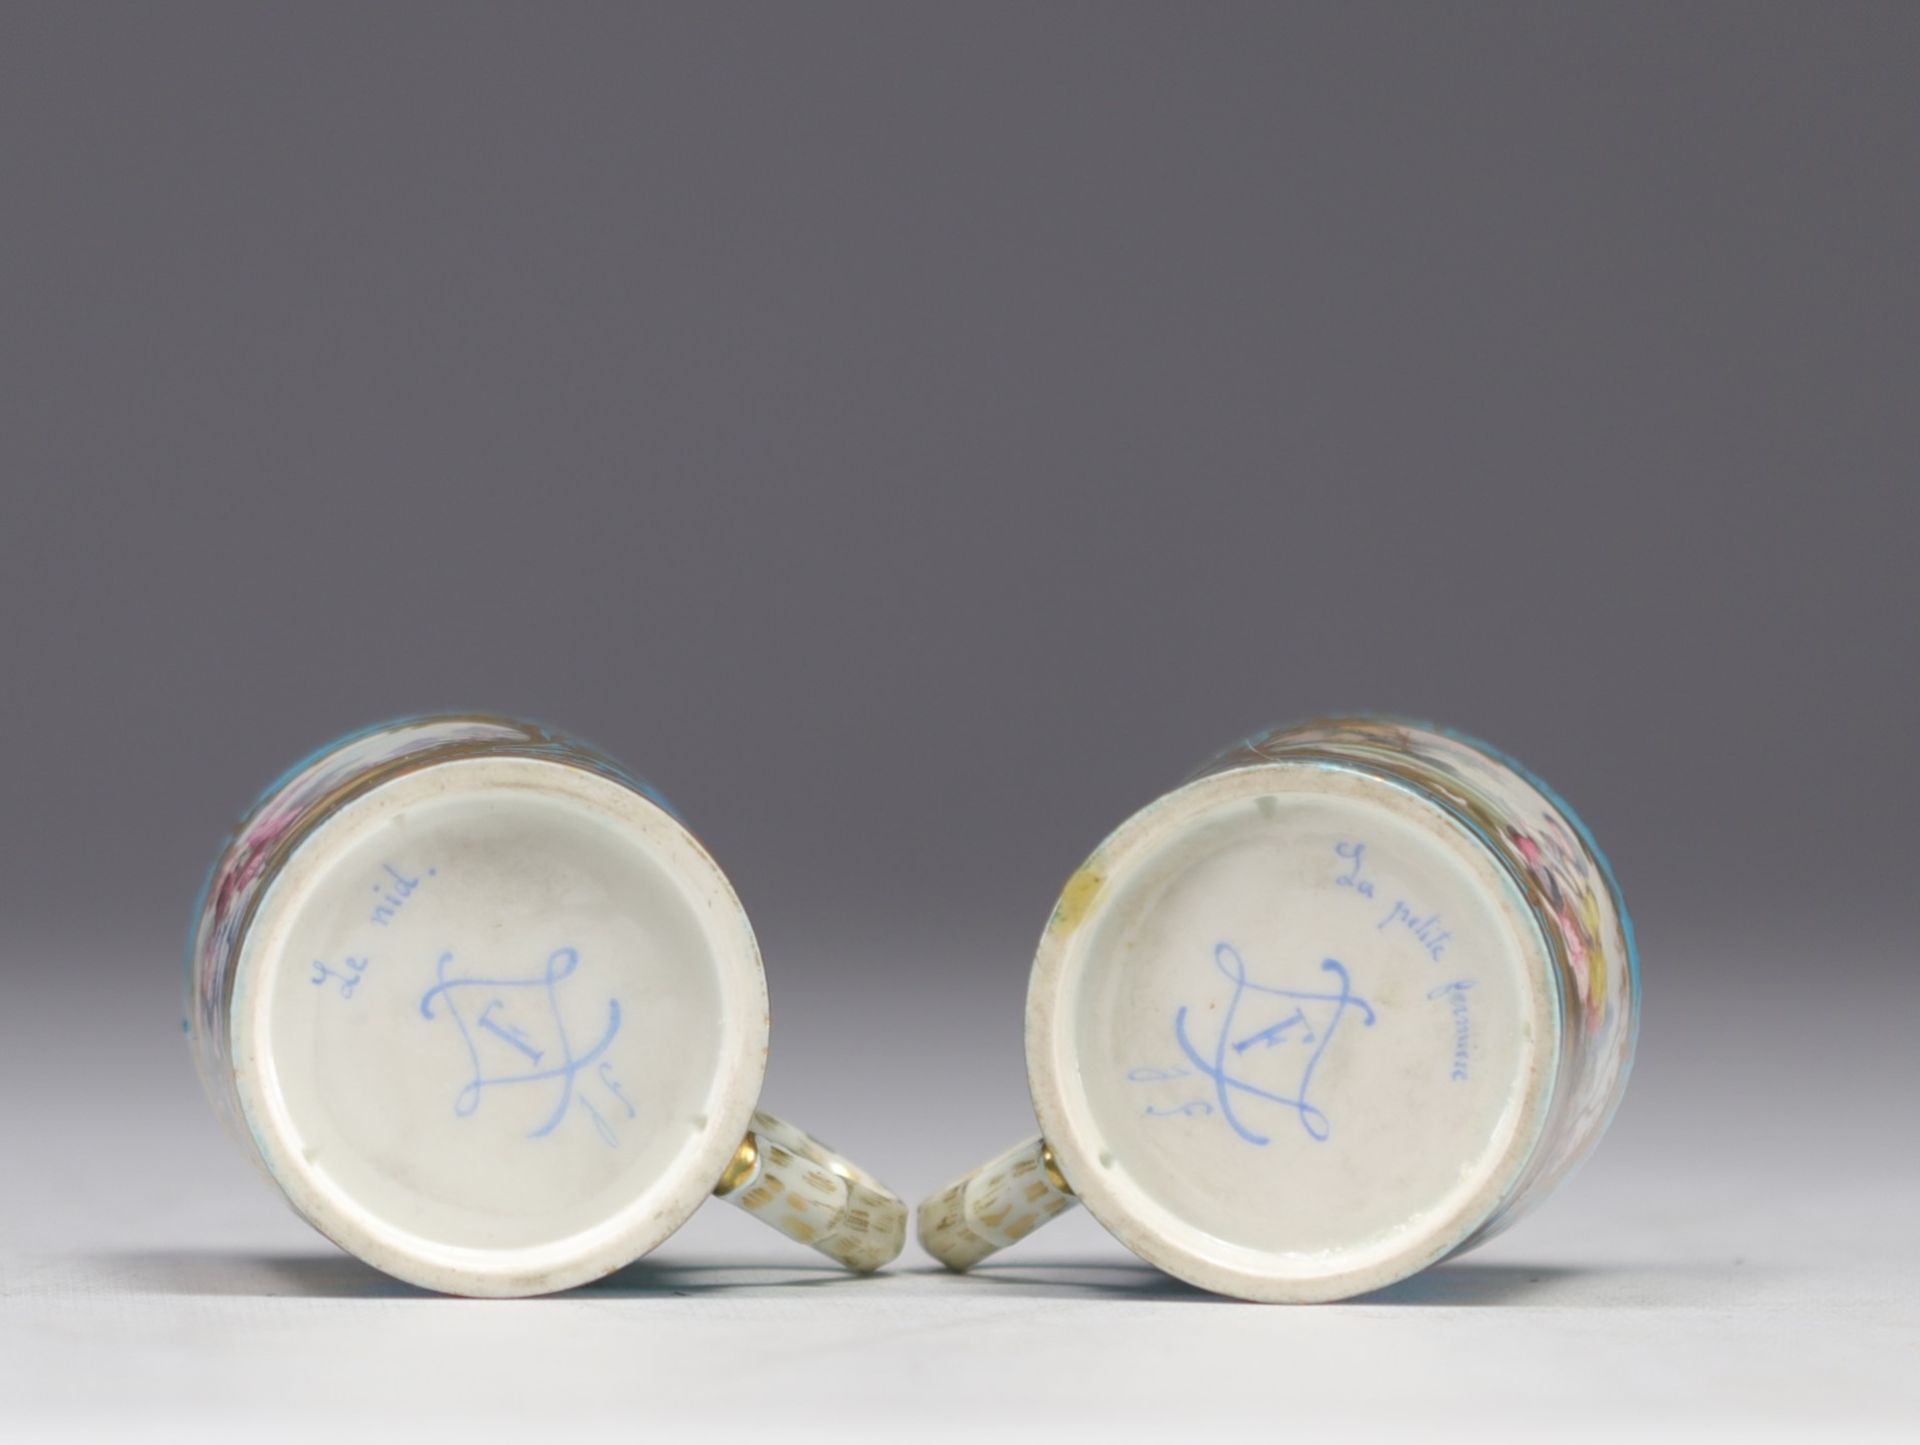 Tete a tete" service in Sevres porcelain on a celestial blue background. - Image 7 of 10